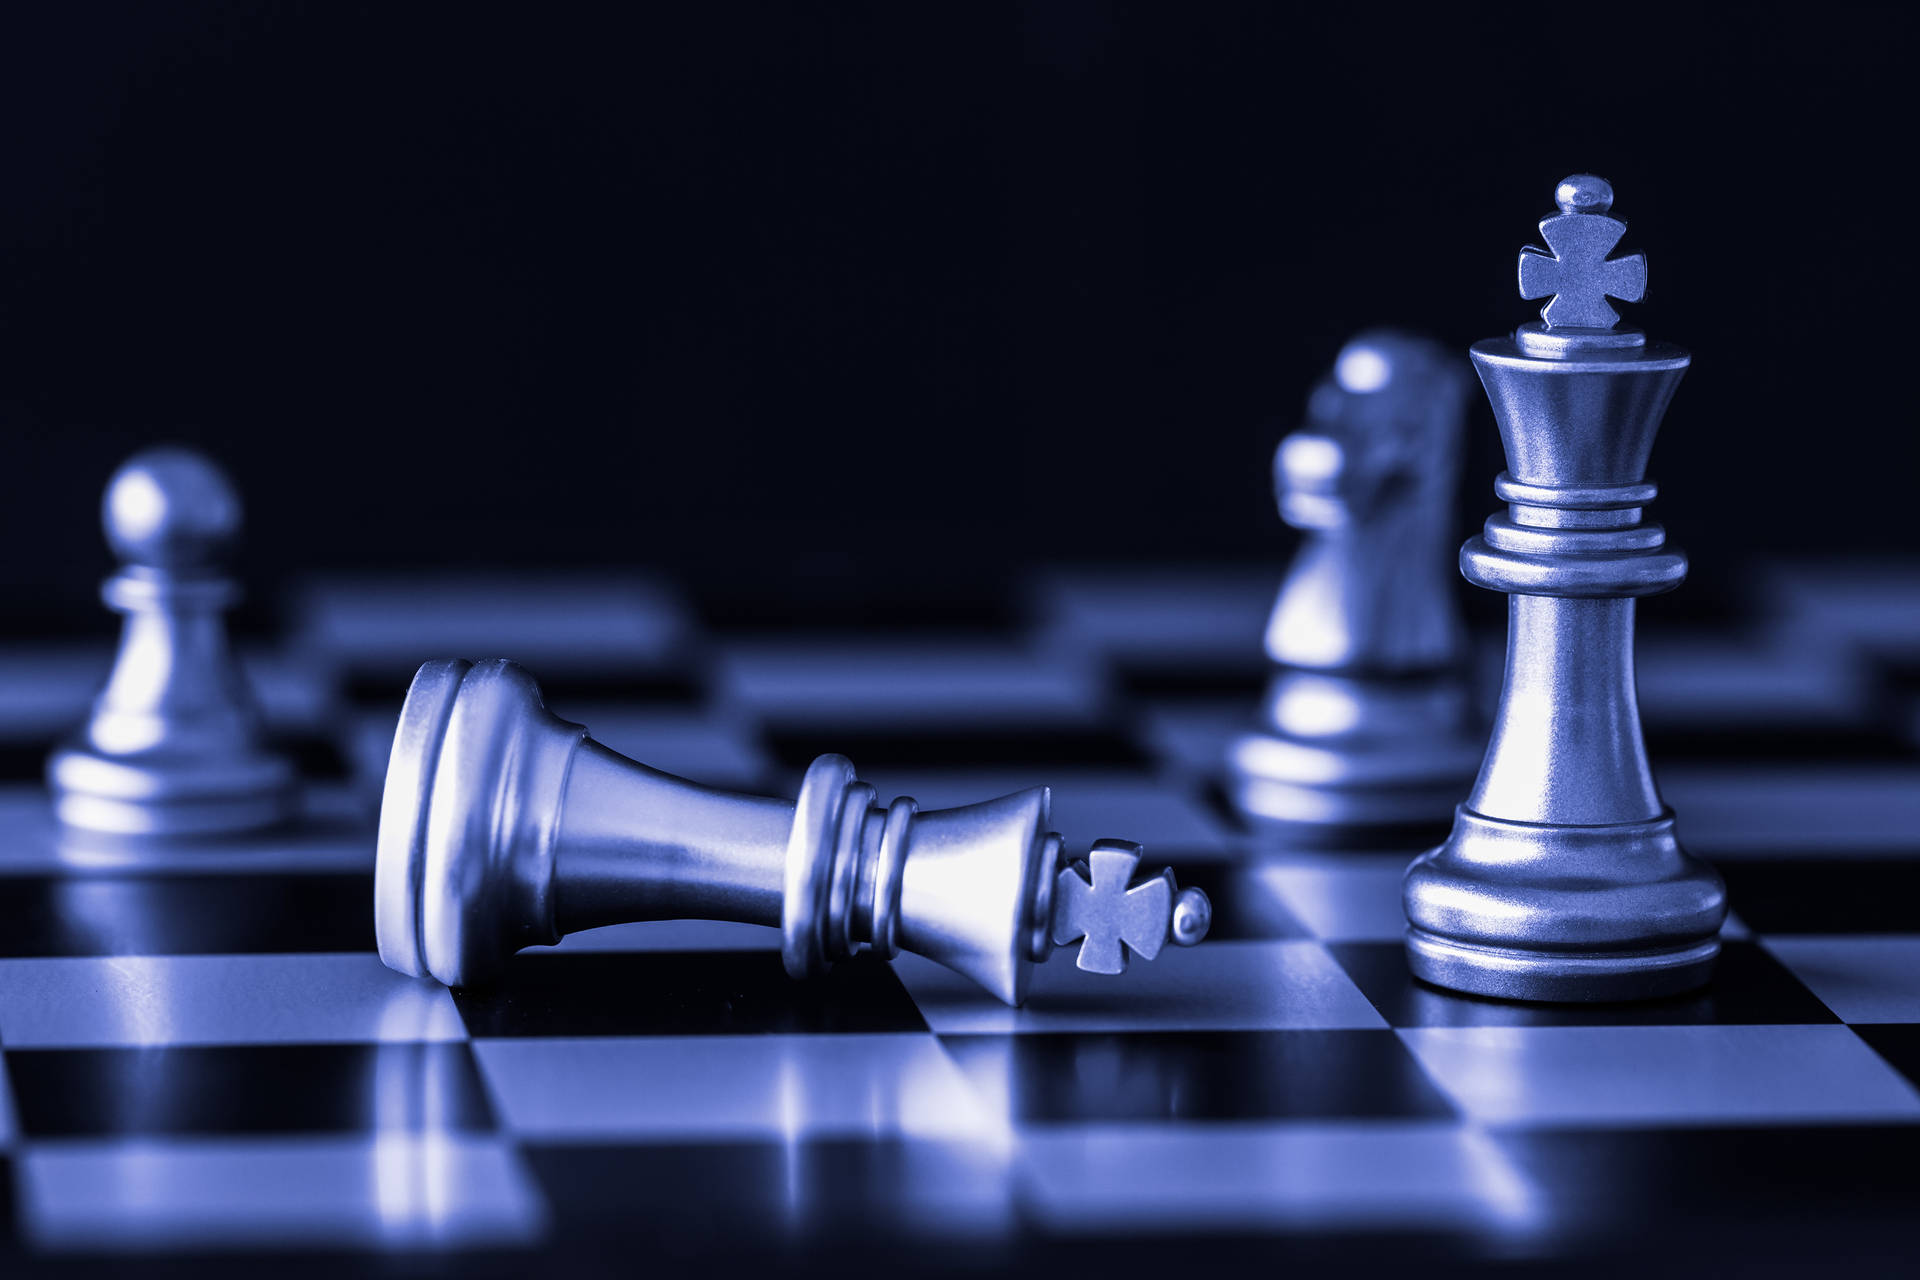 Chess King Wallpapers - Top Free Chess King Backgrounds